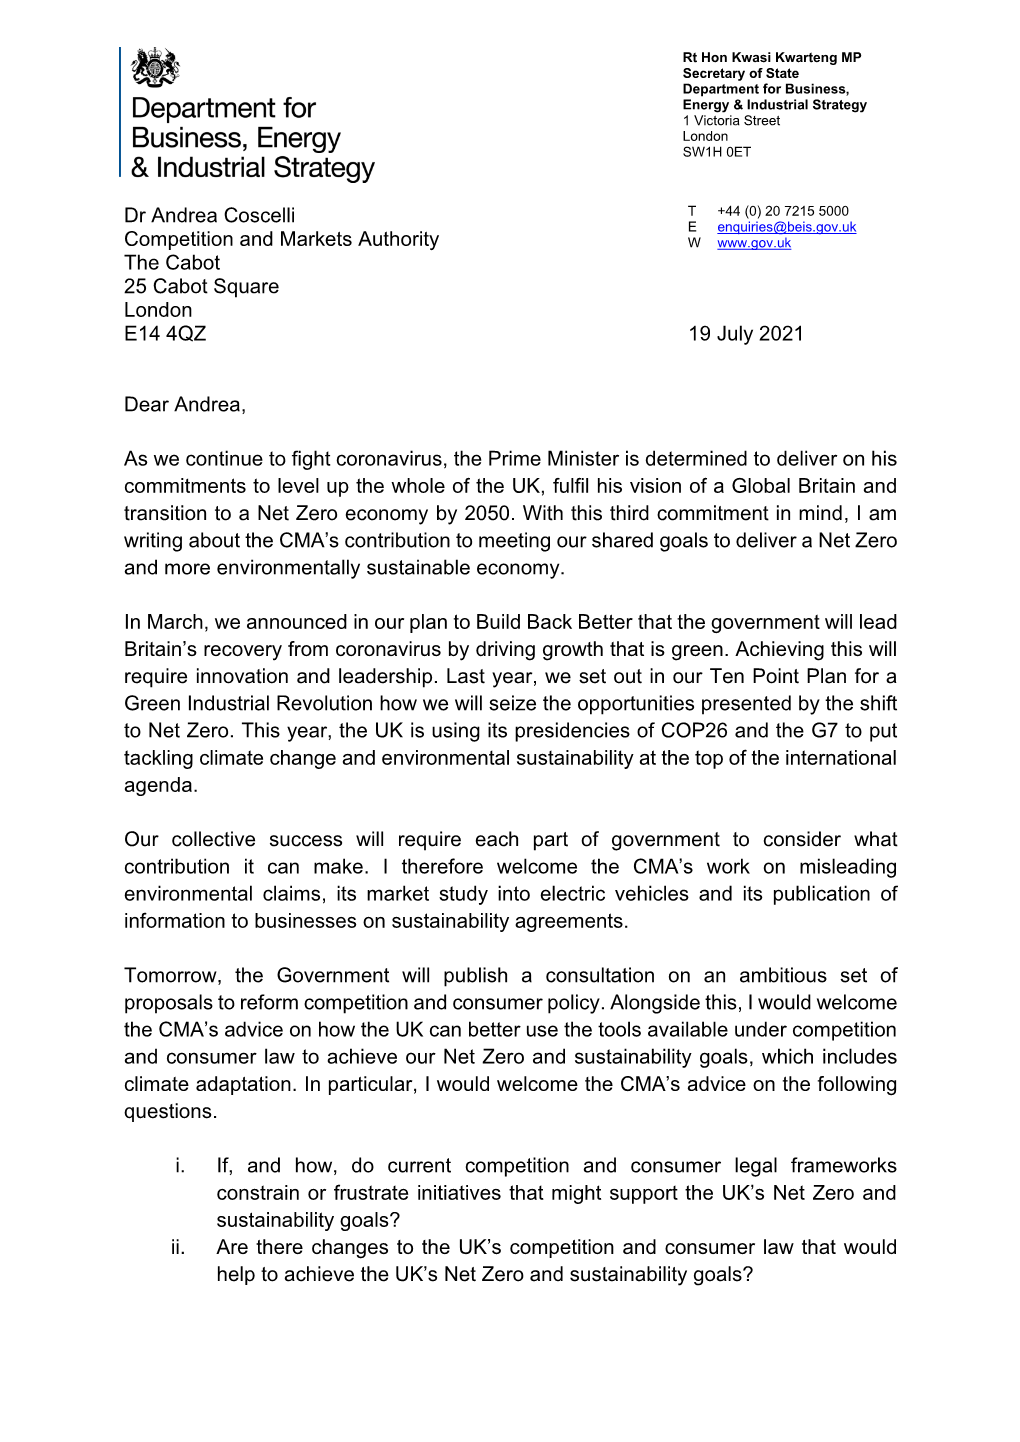 Letter from Kwasi Kwarteng, BEIS Secretary of State, to Andrea